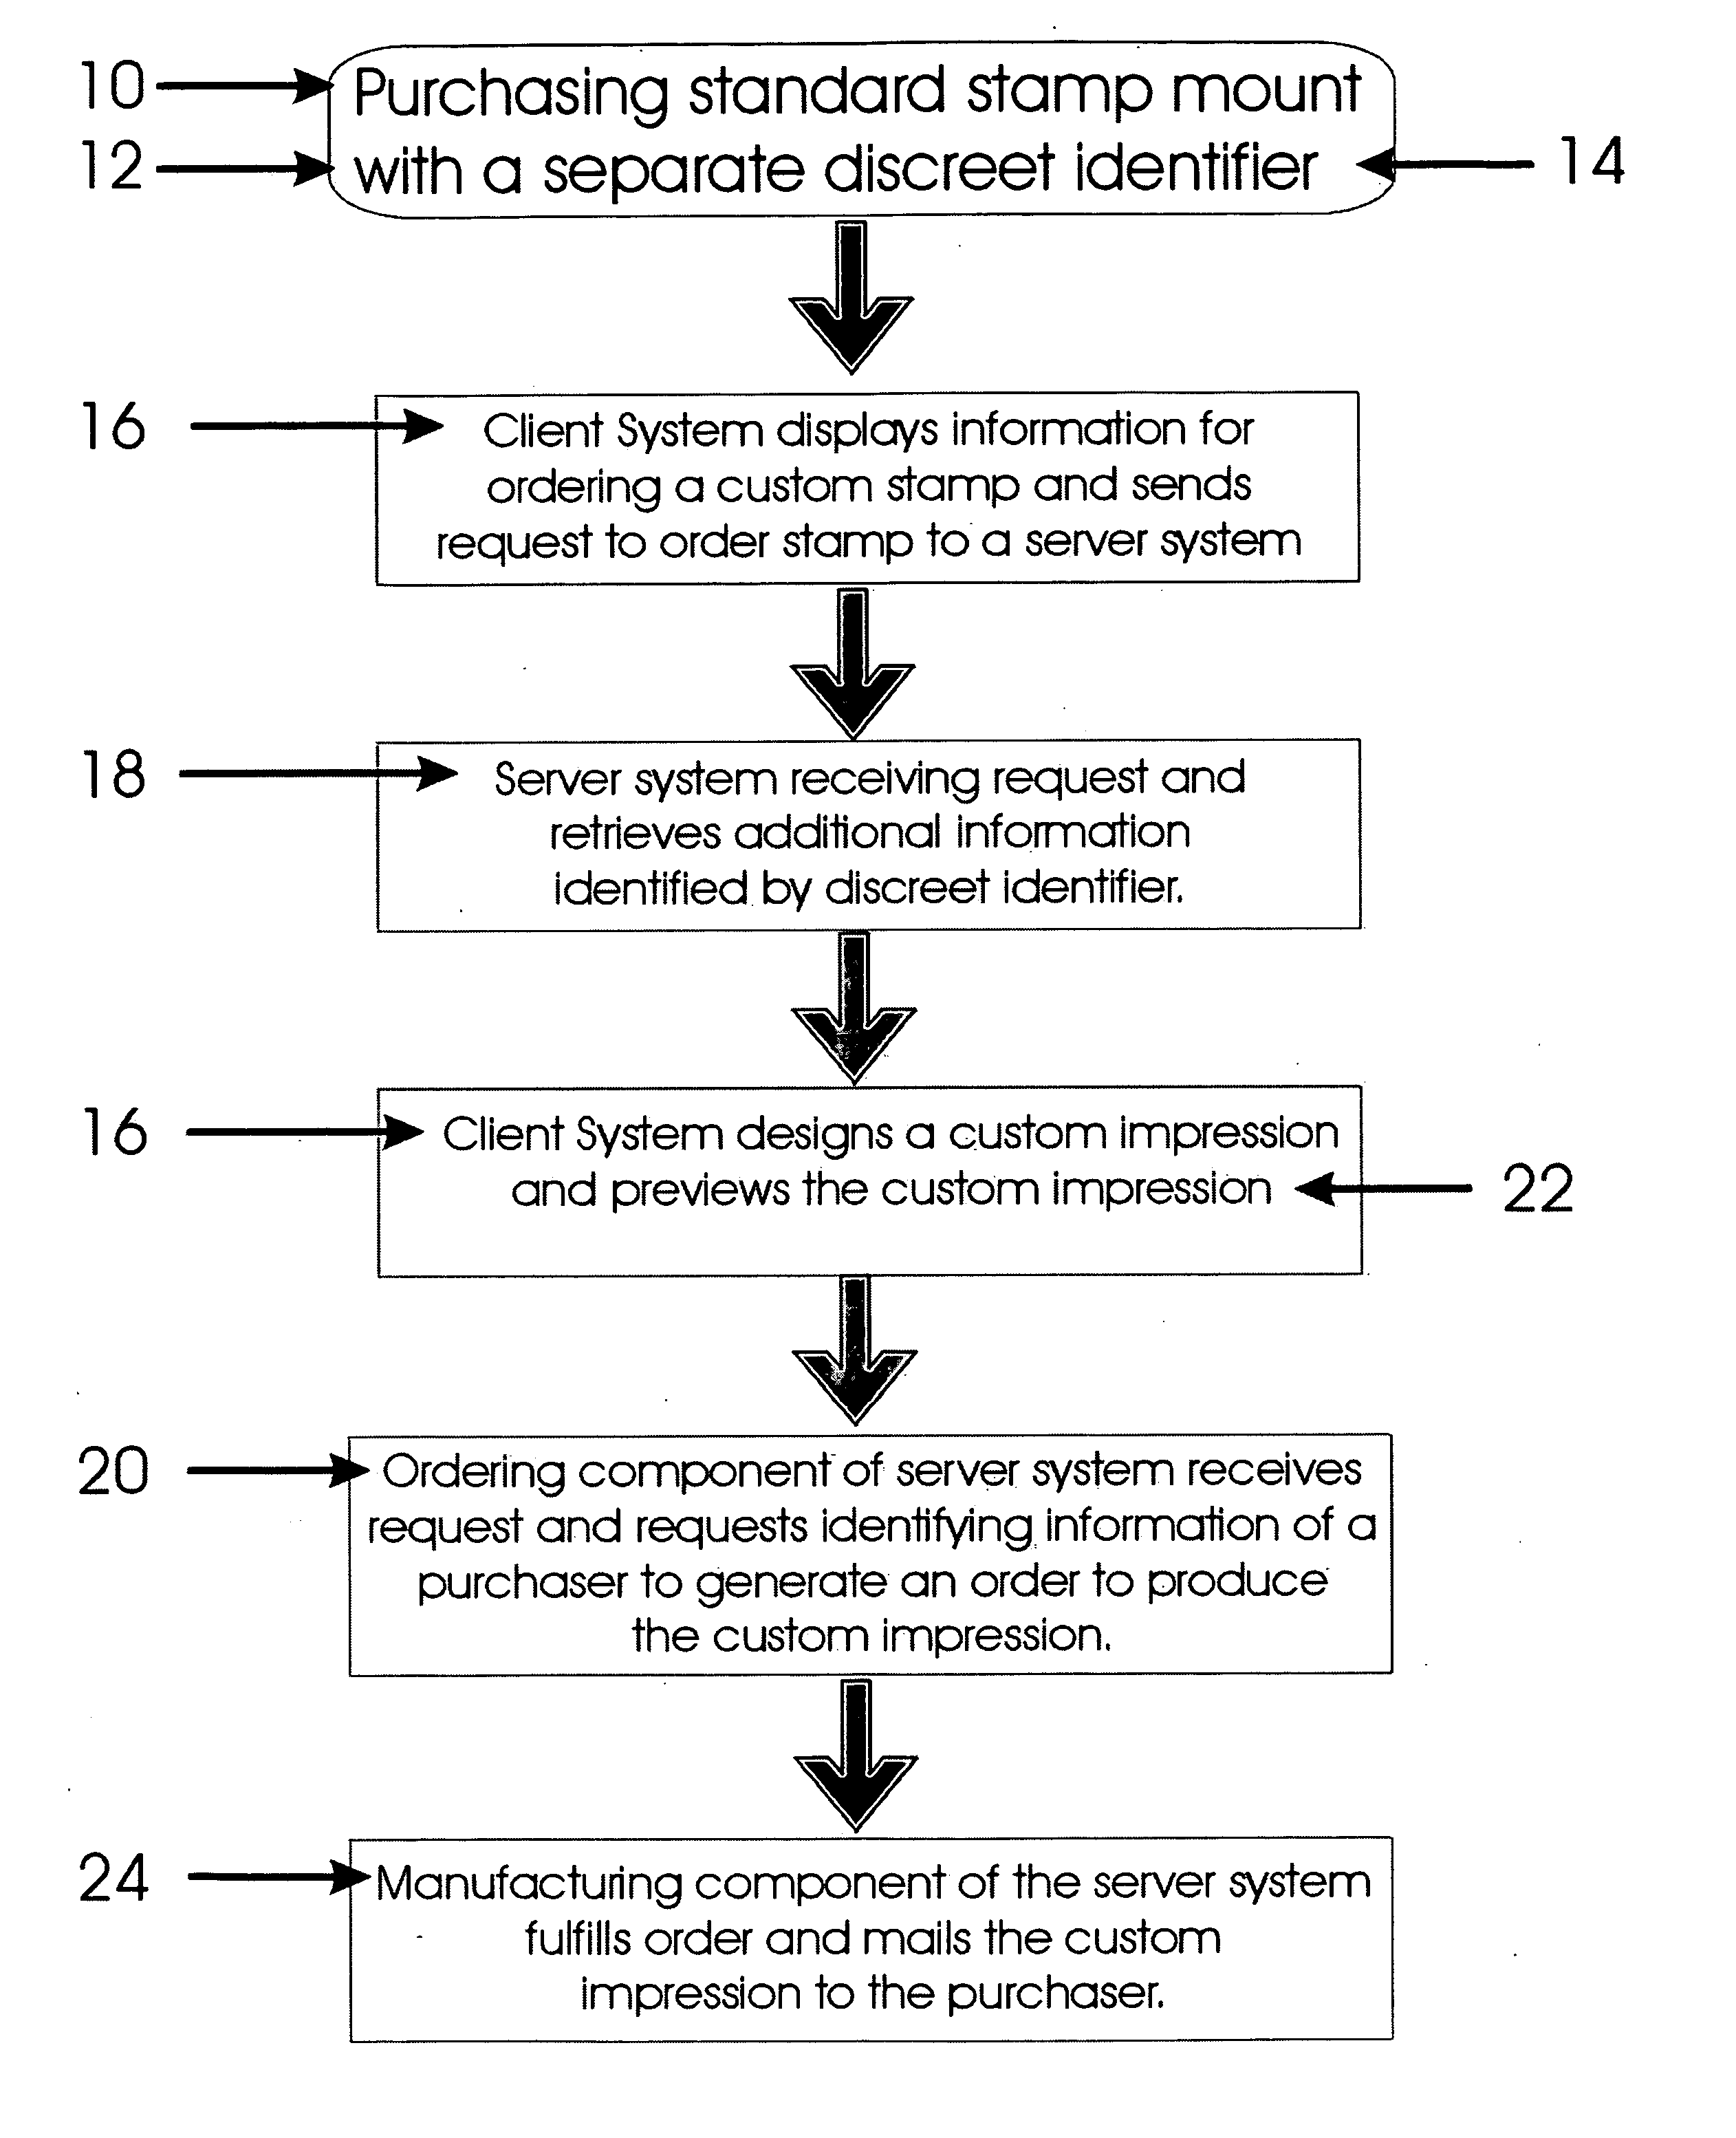 Method of placing an order for a custom stamp